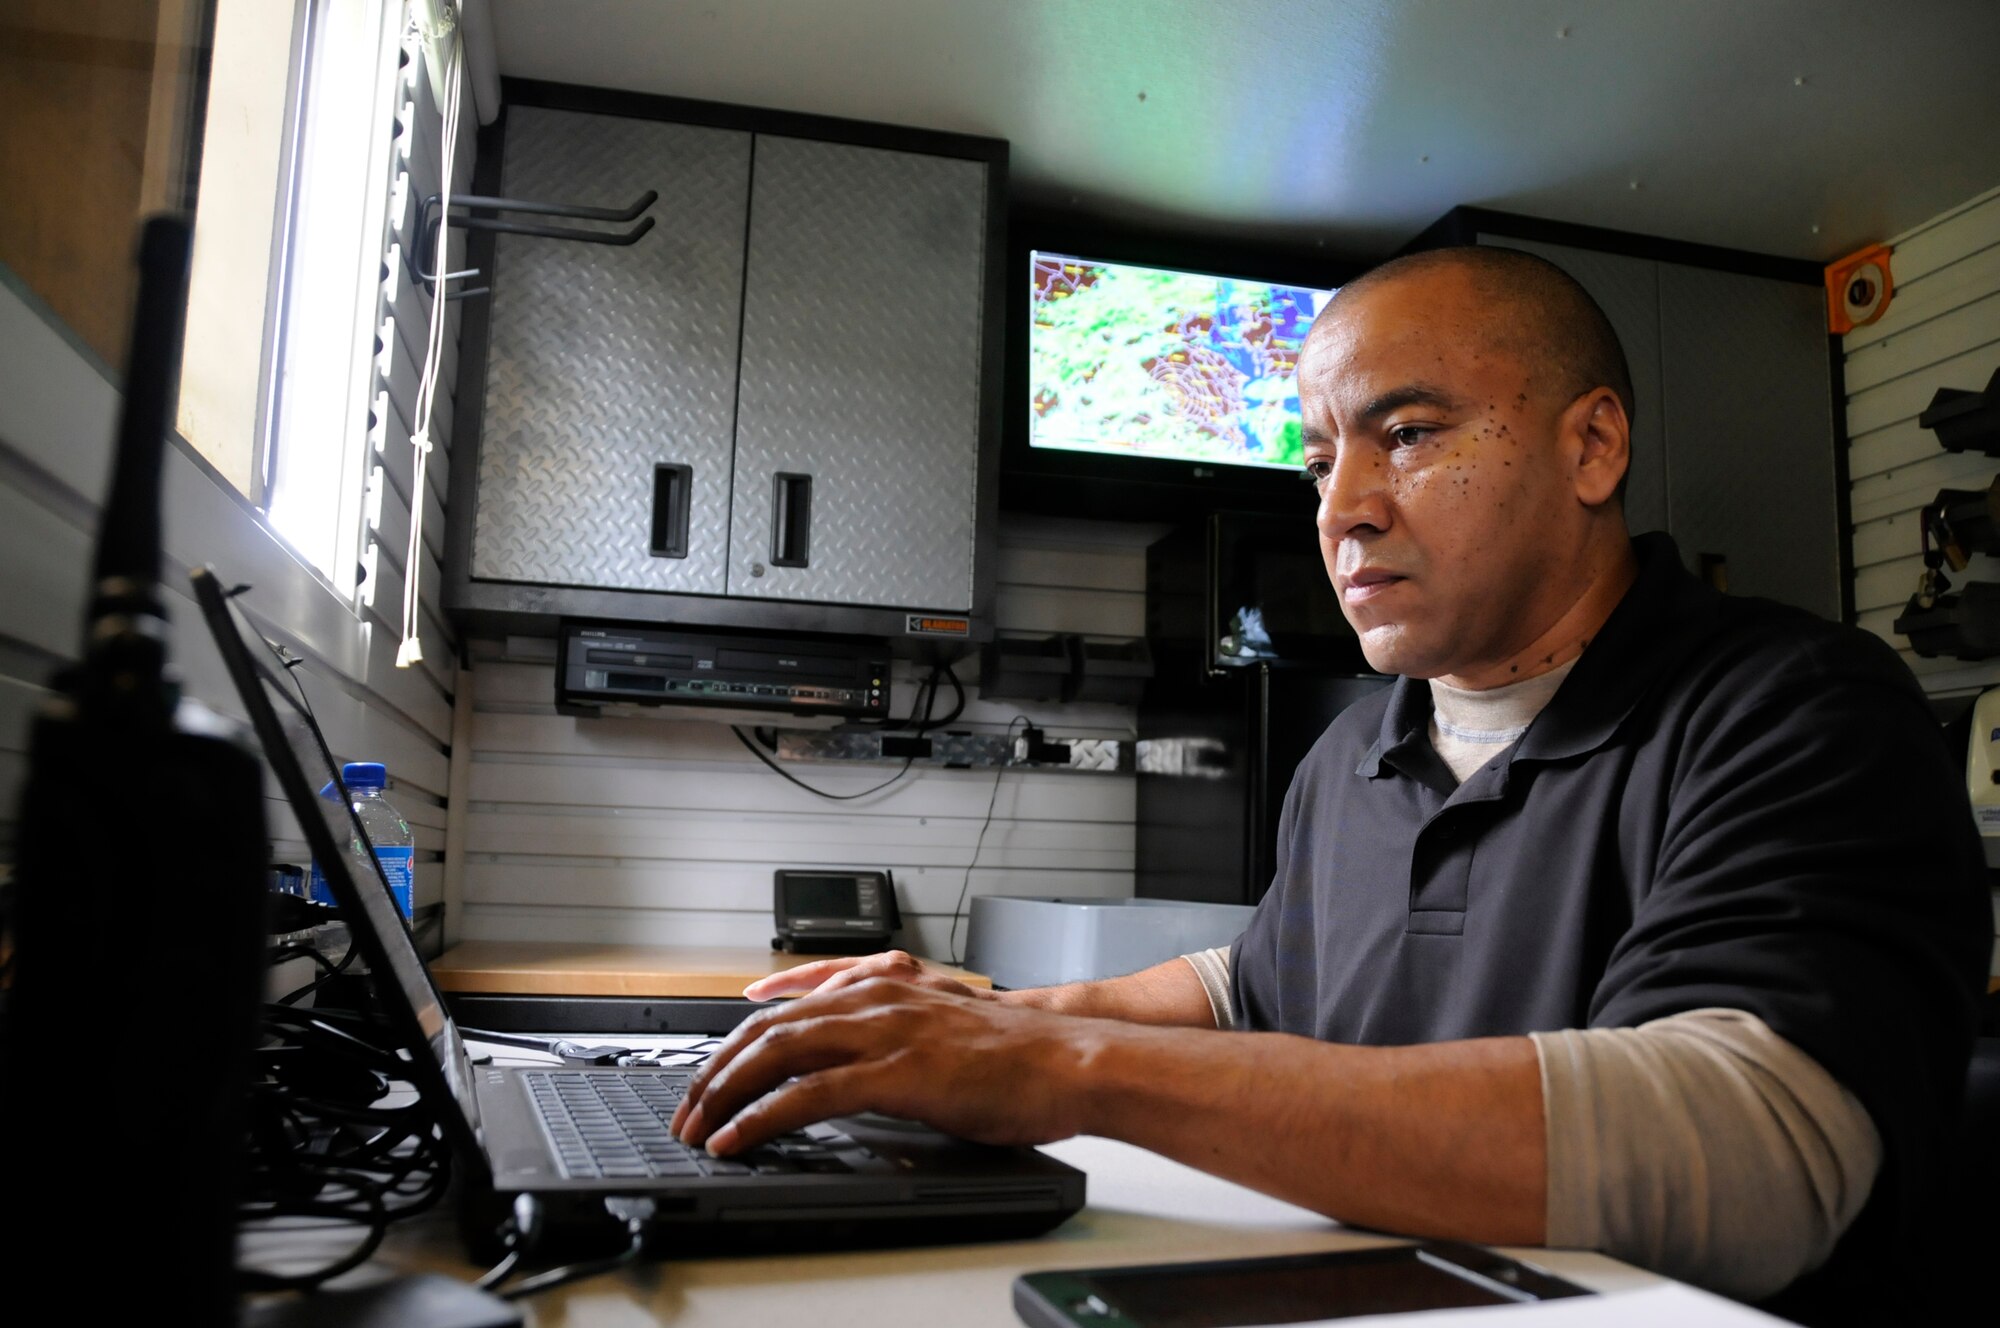 Master Sgt. Malvin Johnson, a weather forecaster from the Virginia Air National Guard, 192nd Fighter Wing, 200th Weather Flight, based at Joint Force Headquarters in Sandston, provided meteorological and planning support for the Union Cycliste Internationale Road World Cycling Championship in Richmond, Sept.18-27, 2015. Richmond was the first U.S. city to host the UCI race since 1986 when it was held in Colorado Springs. (U.S. Air National Guard photo by MSgt. Carlos J. Claudio/ Released)